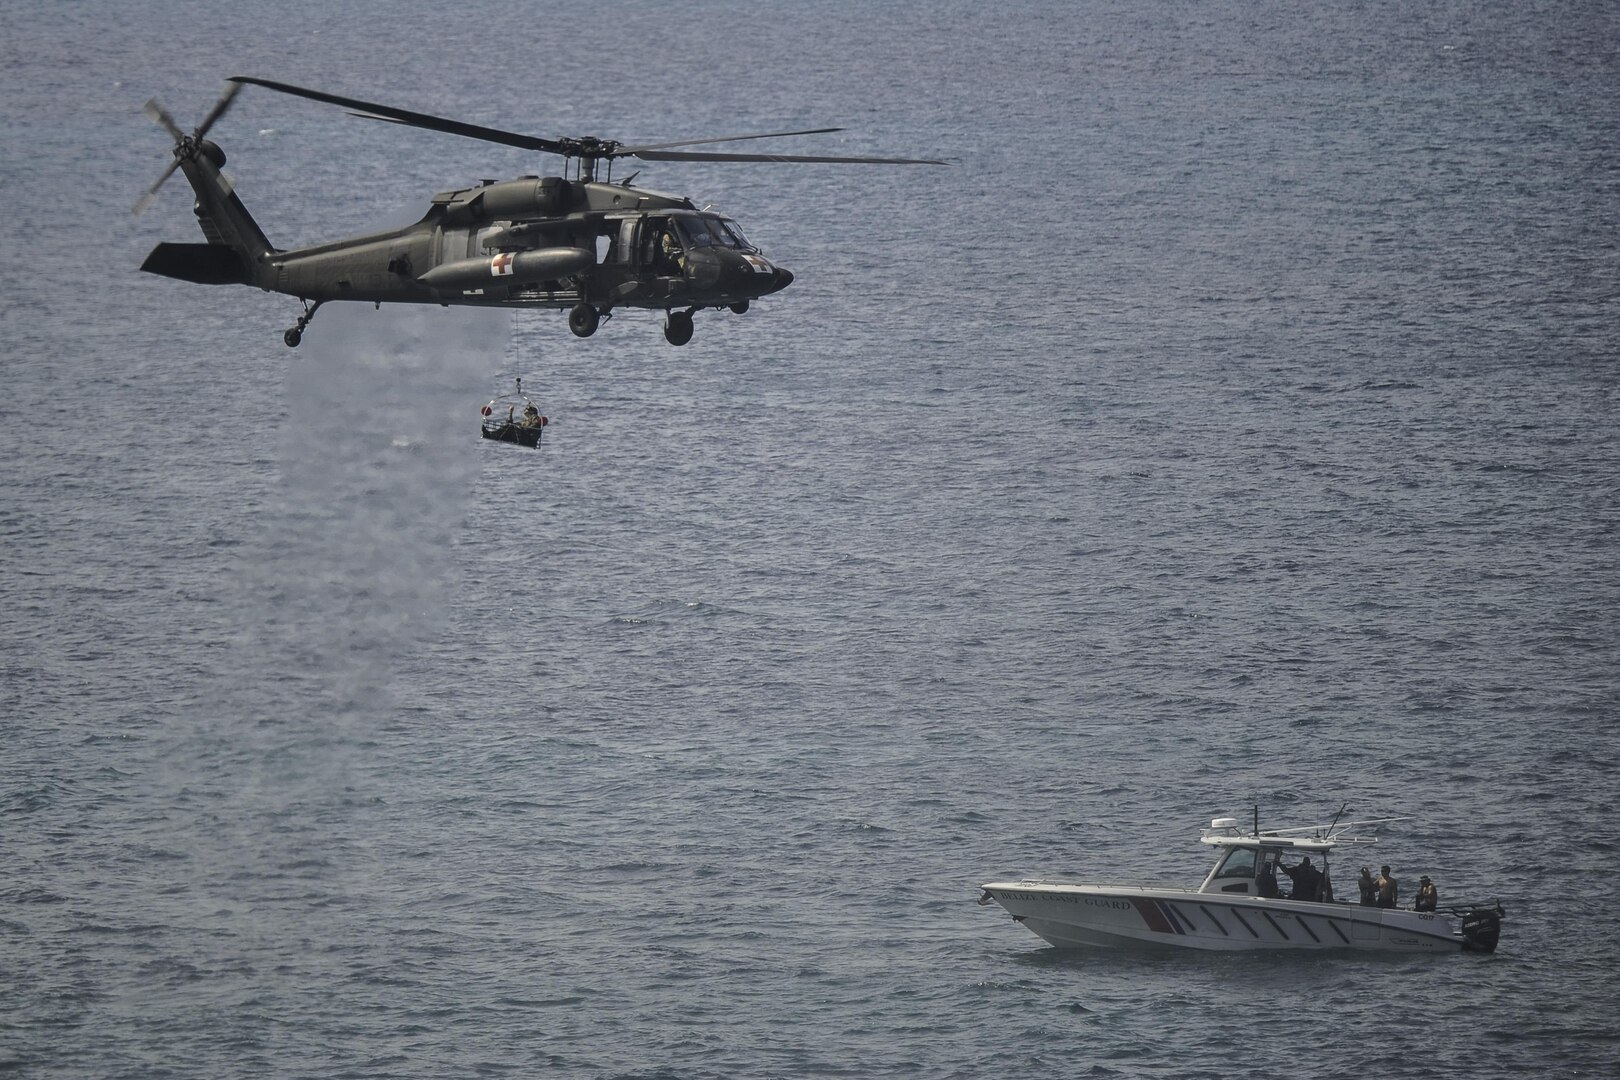 A UH-60L Black Hawk assigned to Joint Task Force-Bravo’s 1st Battalion, 228th Aviation Regiment carries a role player acting as a patient during medical evacuation training off the coast of Belize City, July 18, 2016. The 1-228th AVN’s U.S. Air Ambulance Detachment Honduras handles all of the battalion’s aeromedical operations, which include both training partner nations and providing real-world MEDEVAC capabilities throughout Central America. (U.S. Air Force photo by Staff Sgt. Siuta B. Ika) 